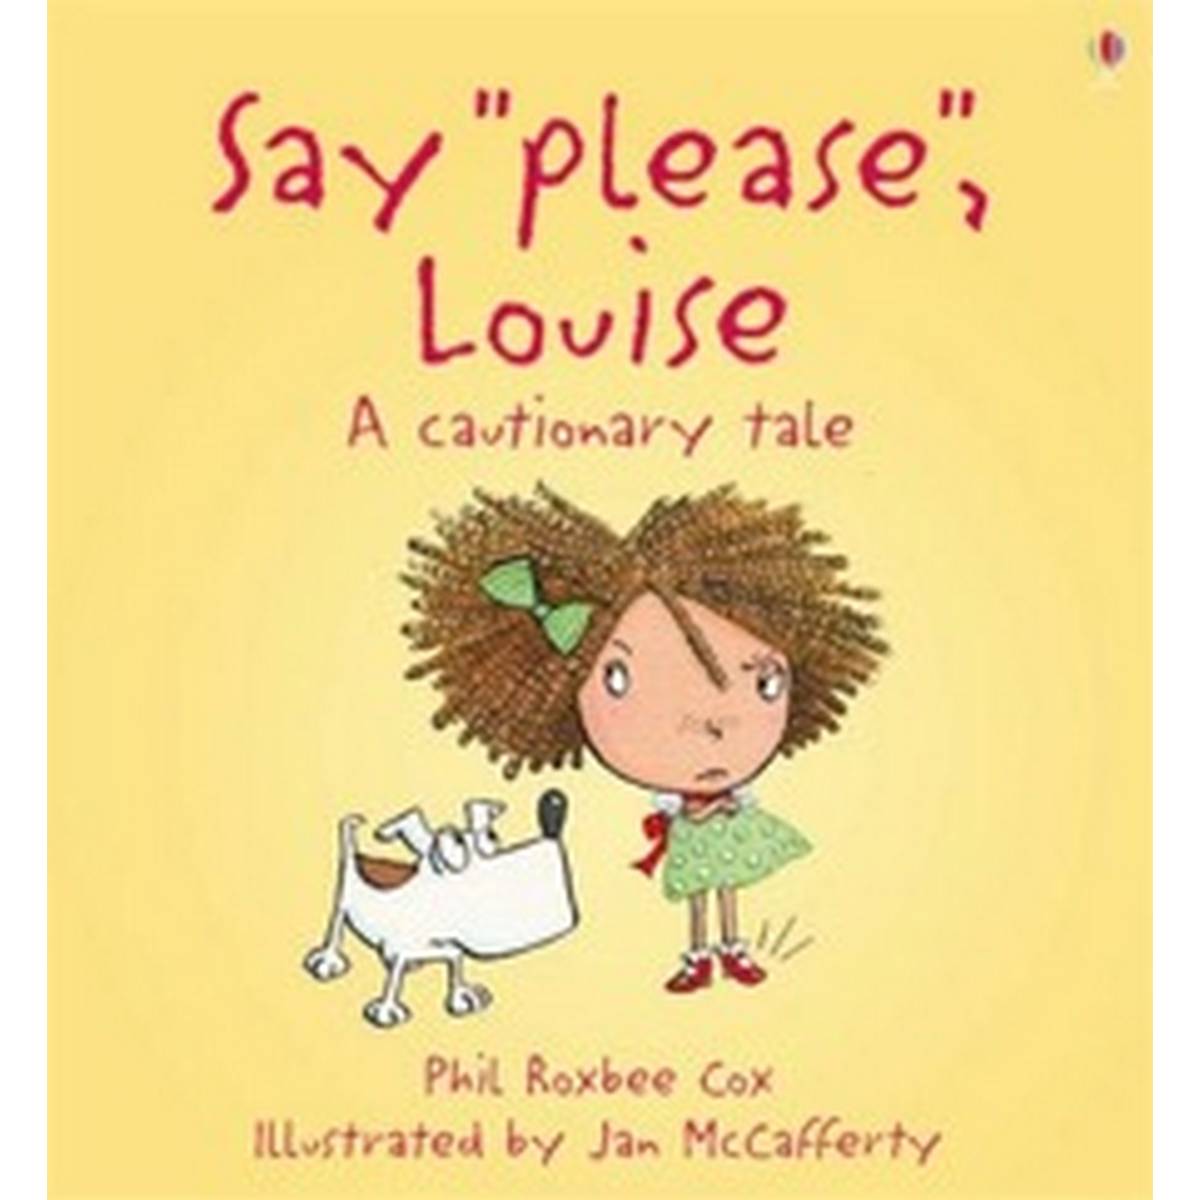 Say "please", Louise